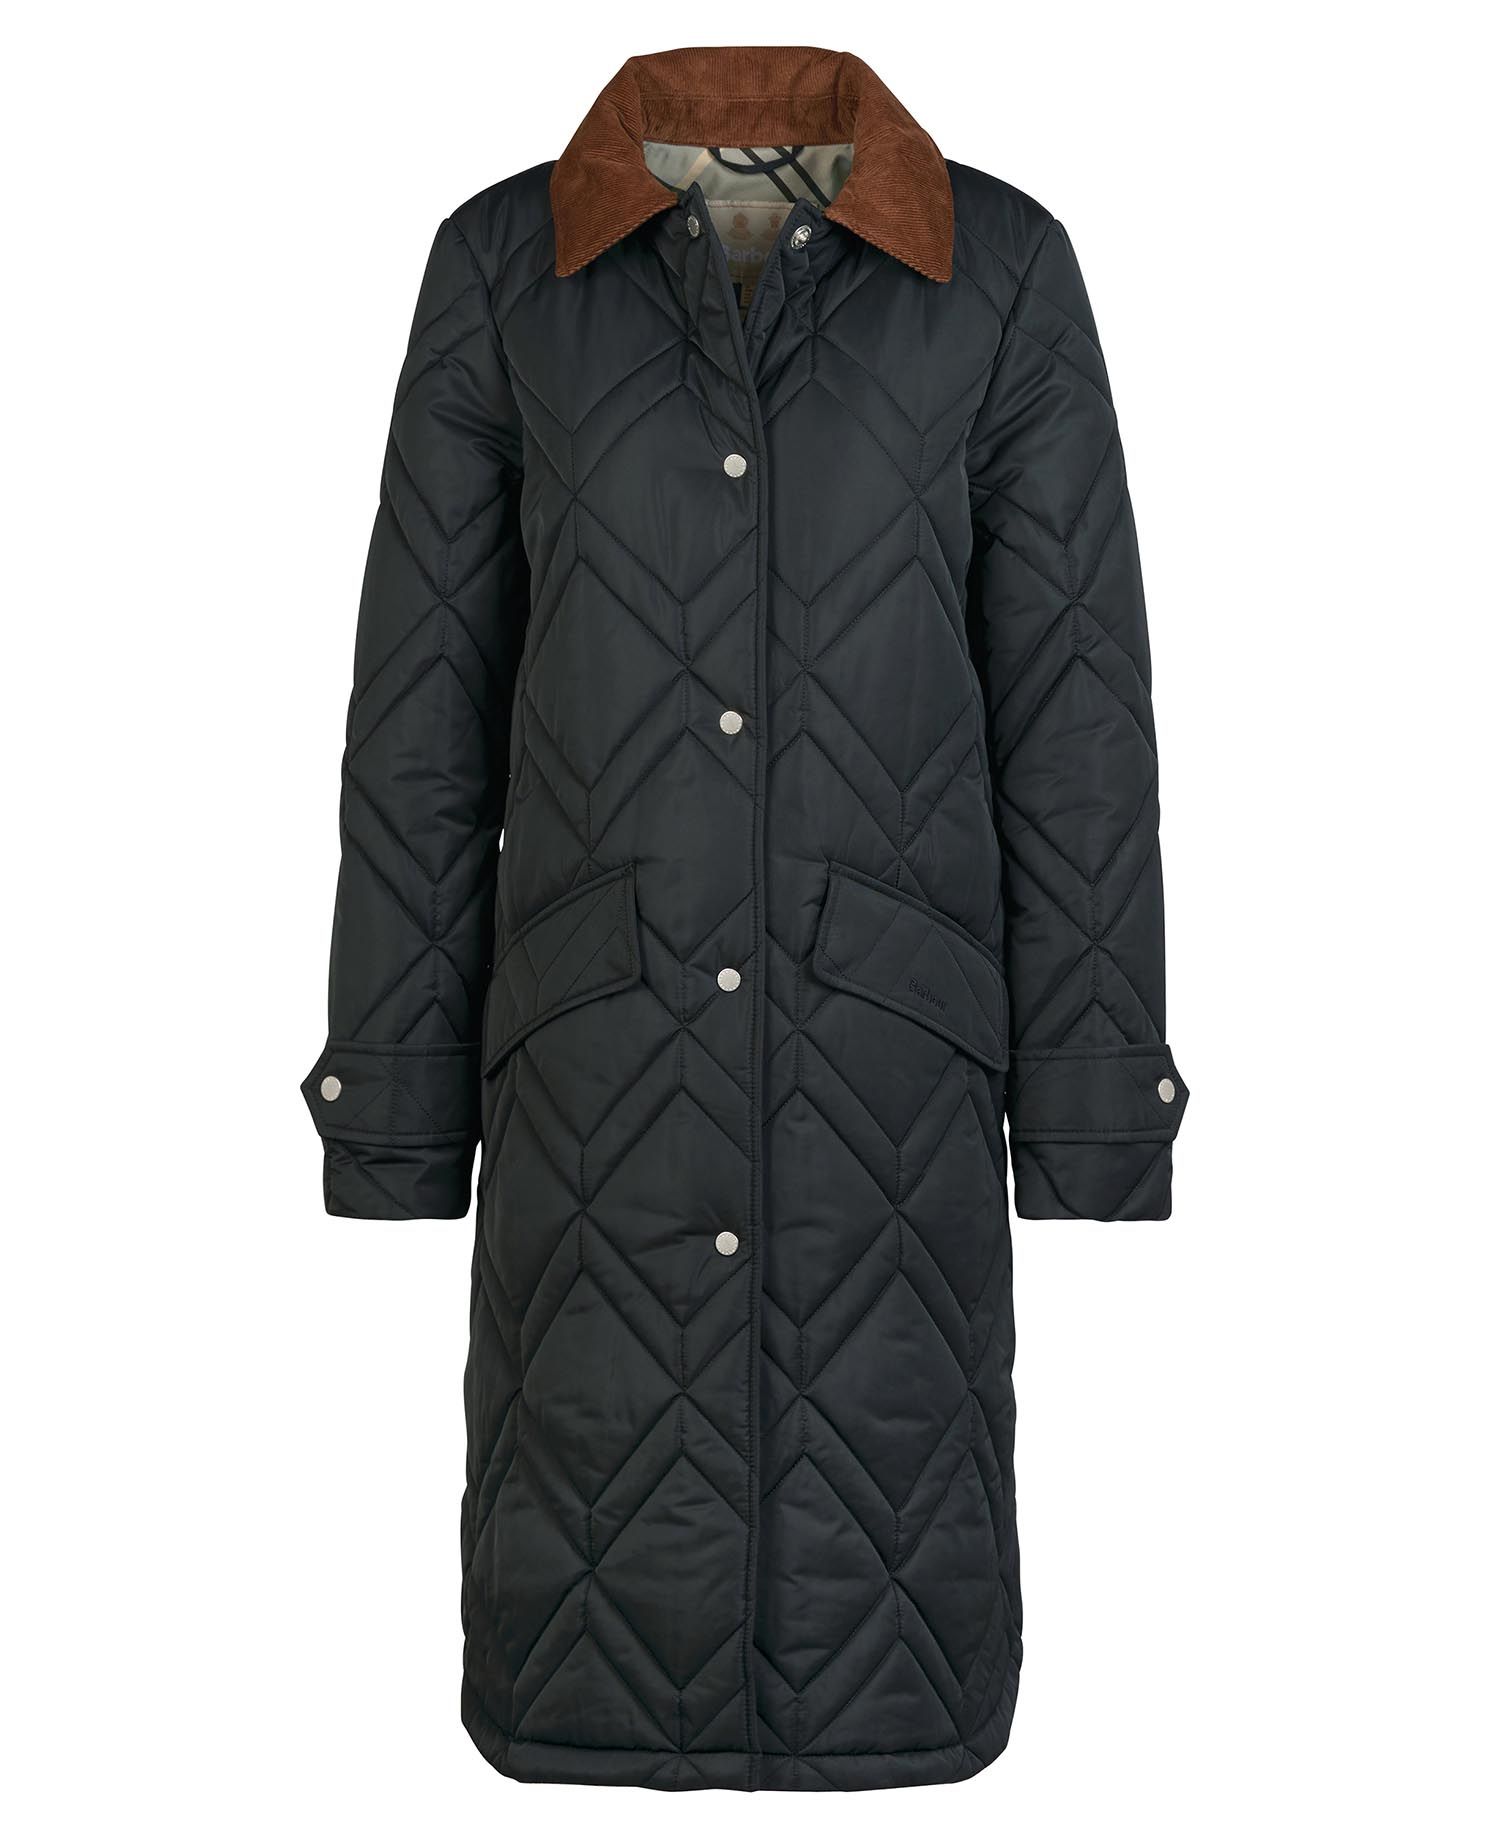 Barbour Bonnie Quilted Jacket